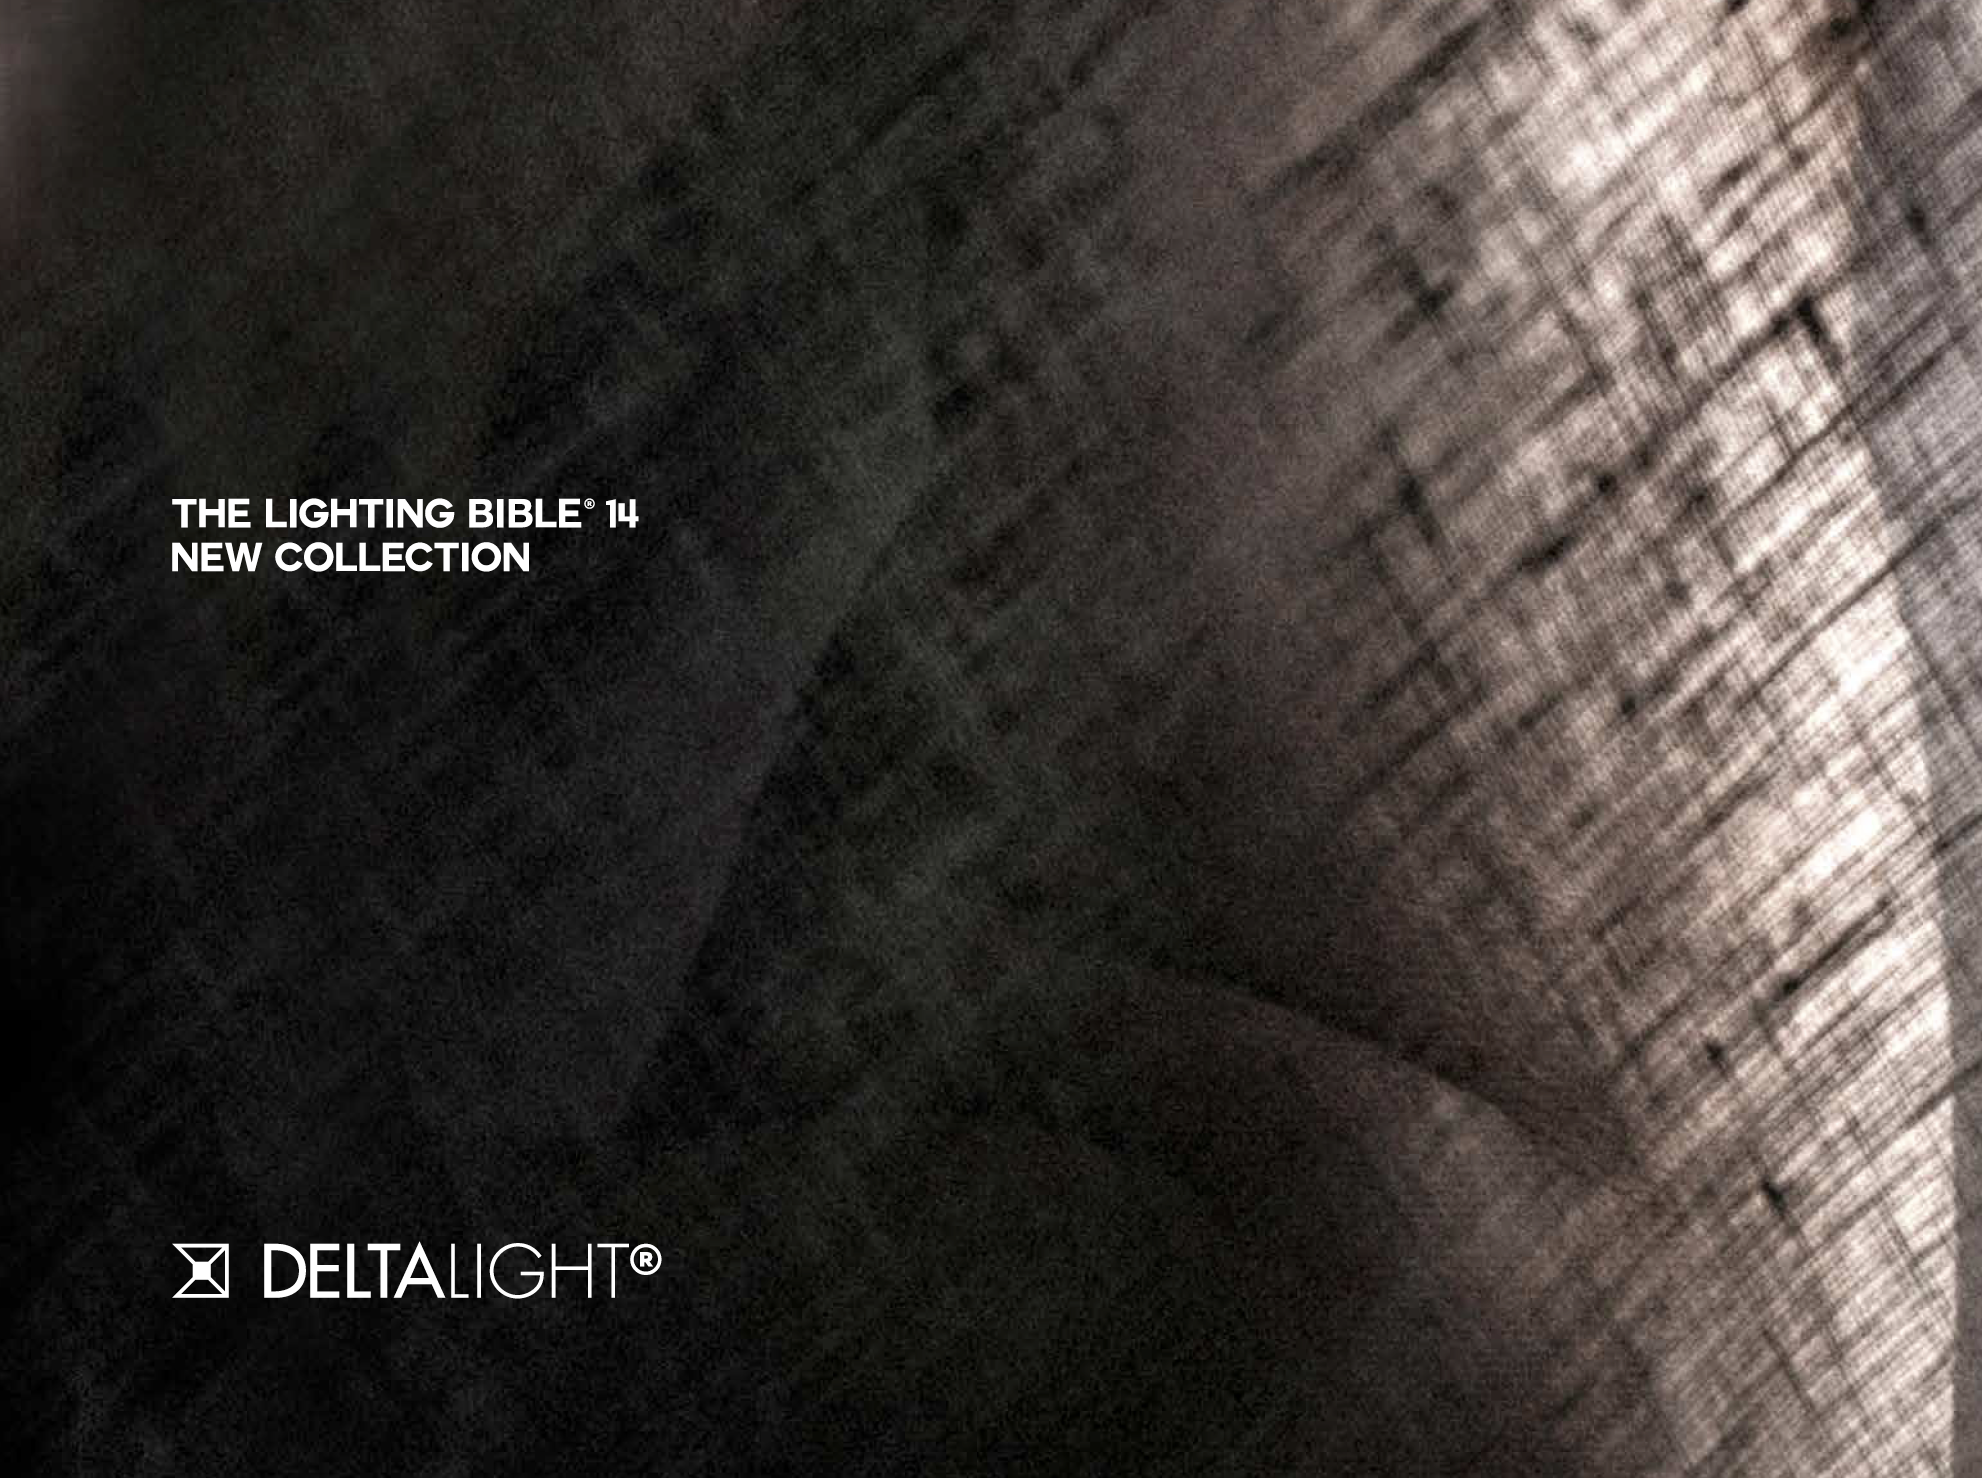 The Lighting Bible 14 New Collection OUT NOW